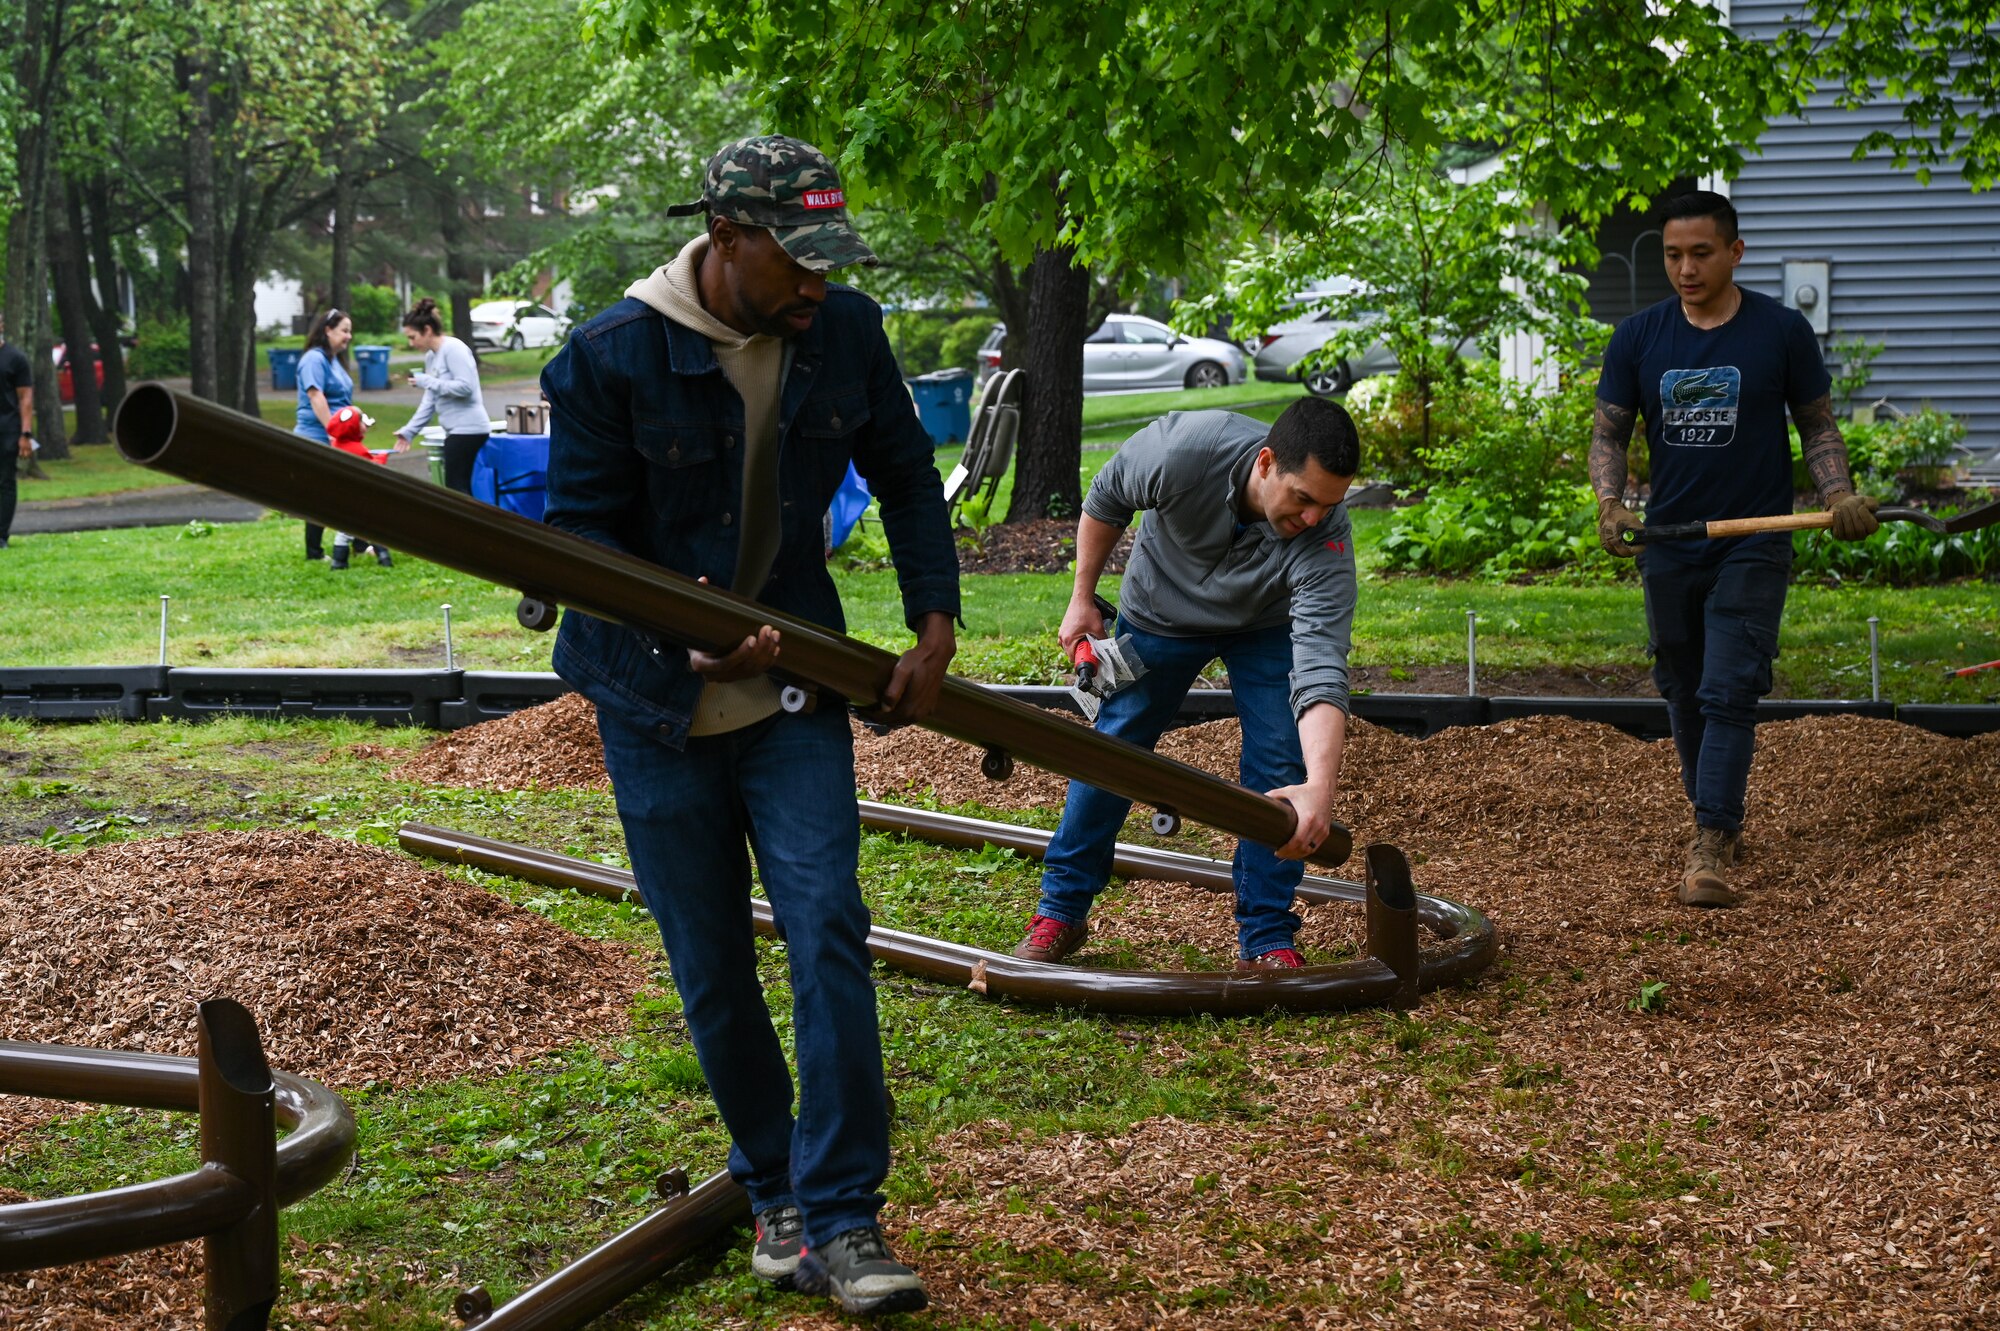 Members of the 113th Civil Engineer Squadron, District of Columbia Air National Guard, spread mulch and arrange segments of playground equipment as they participate in a volunteer project to complete the Master Sgt. Scott Walters Memorial Playground in Vienna, Virginia, April 29th, 2023. Walters, a well-loved member of the unit and community organizer, asked for the playground to be constructed as one of his final wishes. (U.S. Air Force photo by Tech. Sgt. Andrew Enriquez)